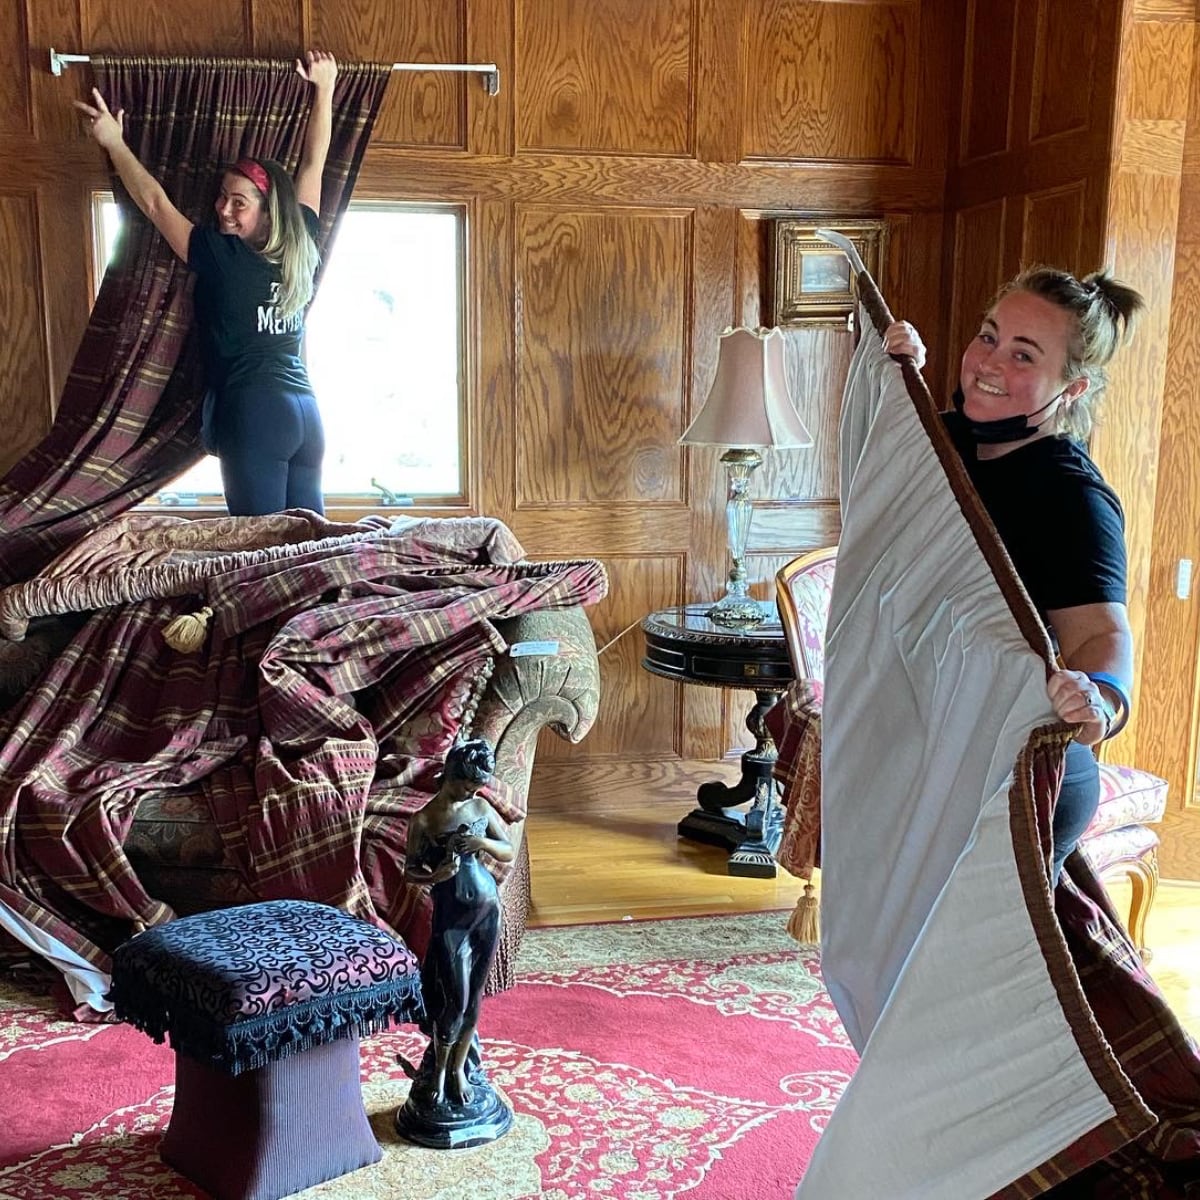 Two young women are taking down curtains while smiling